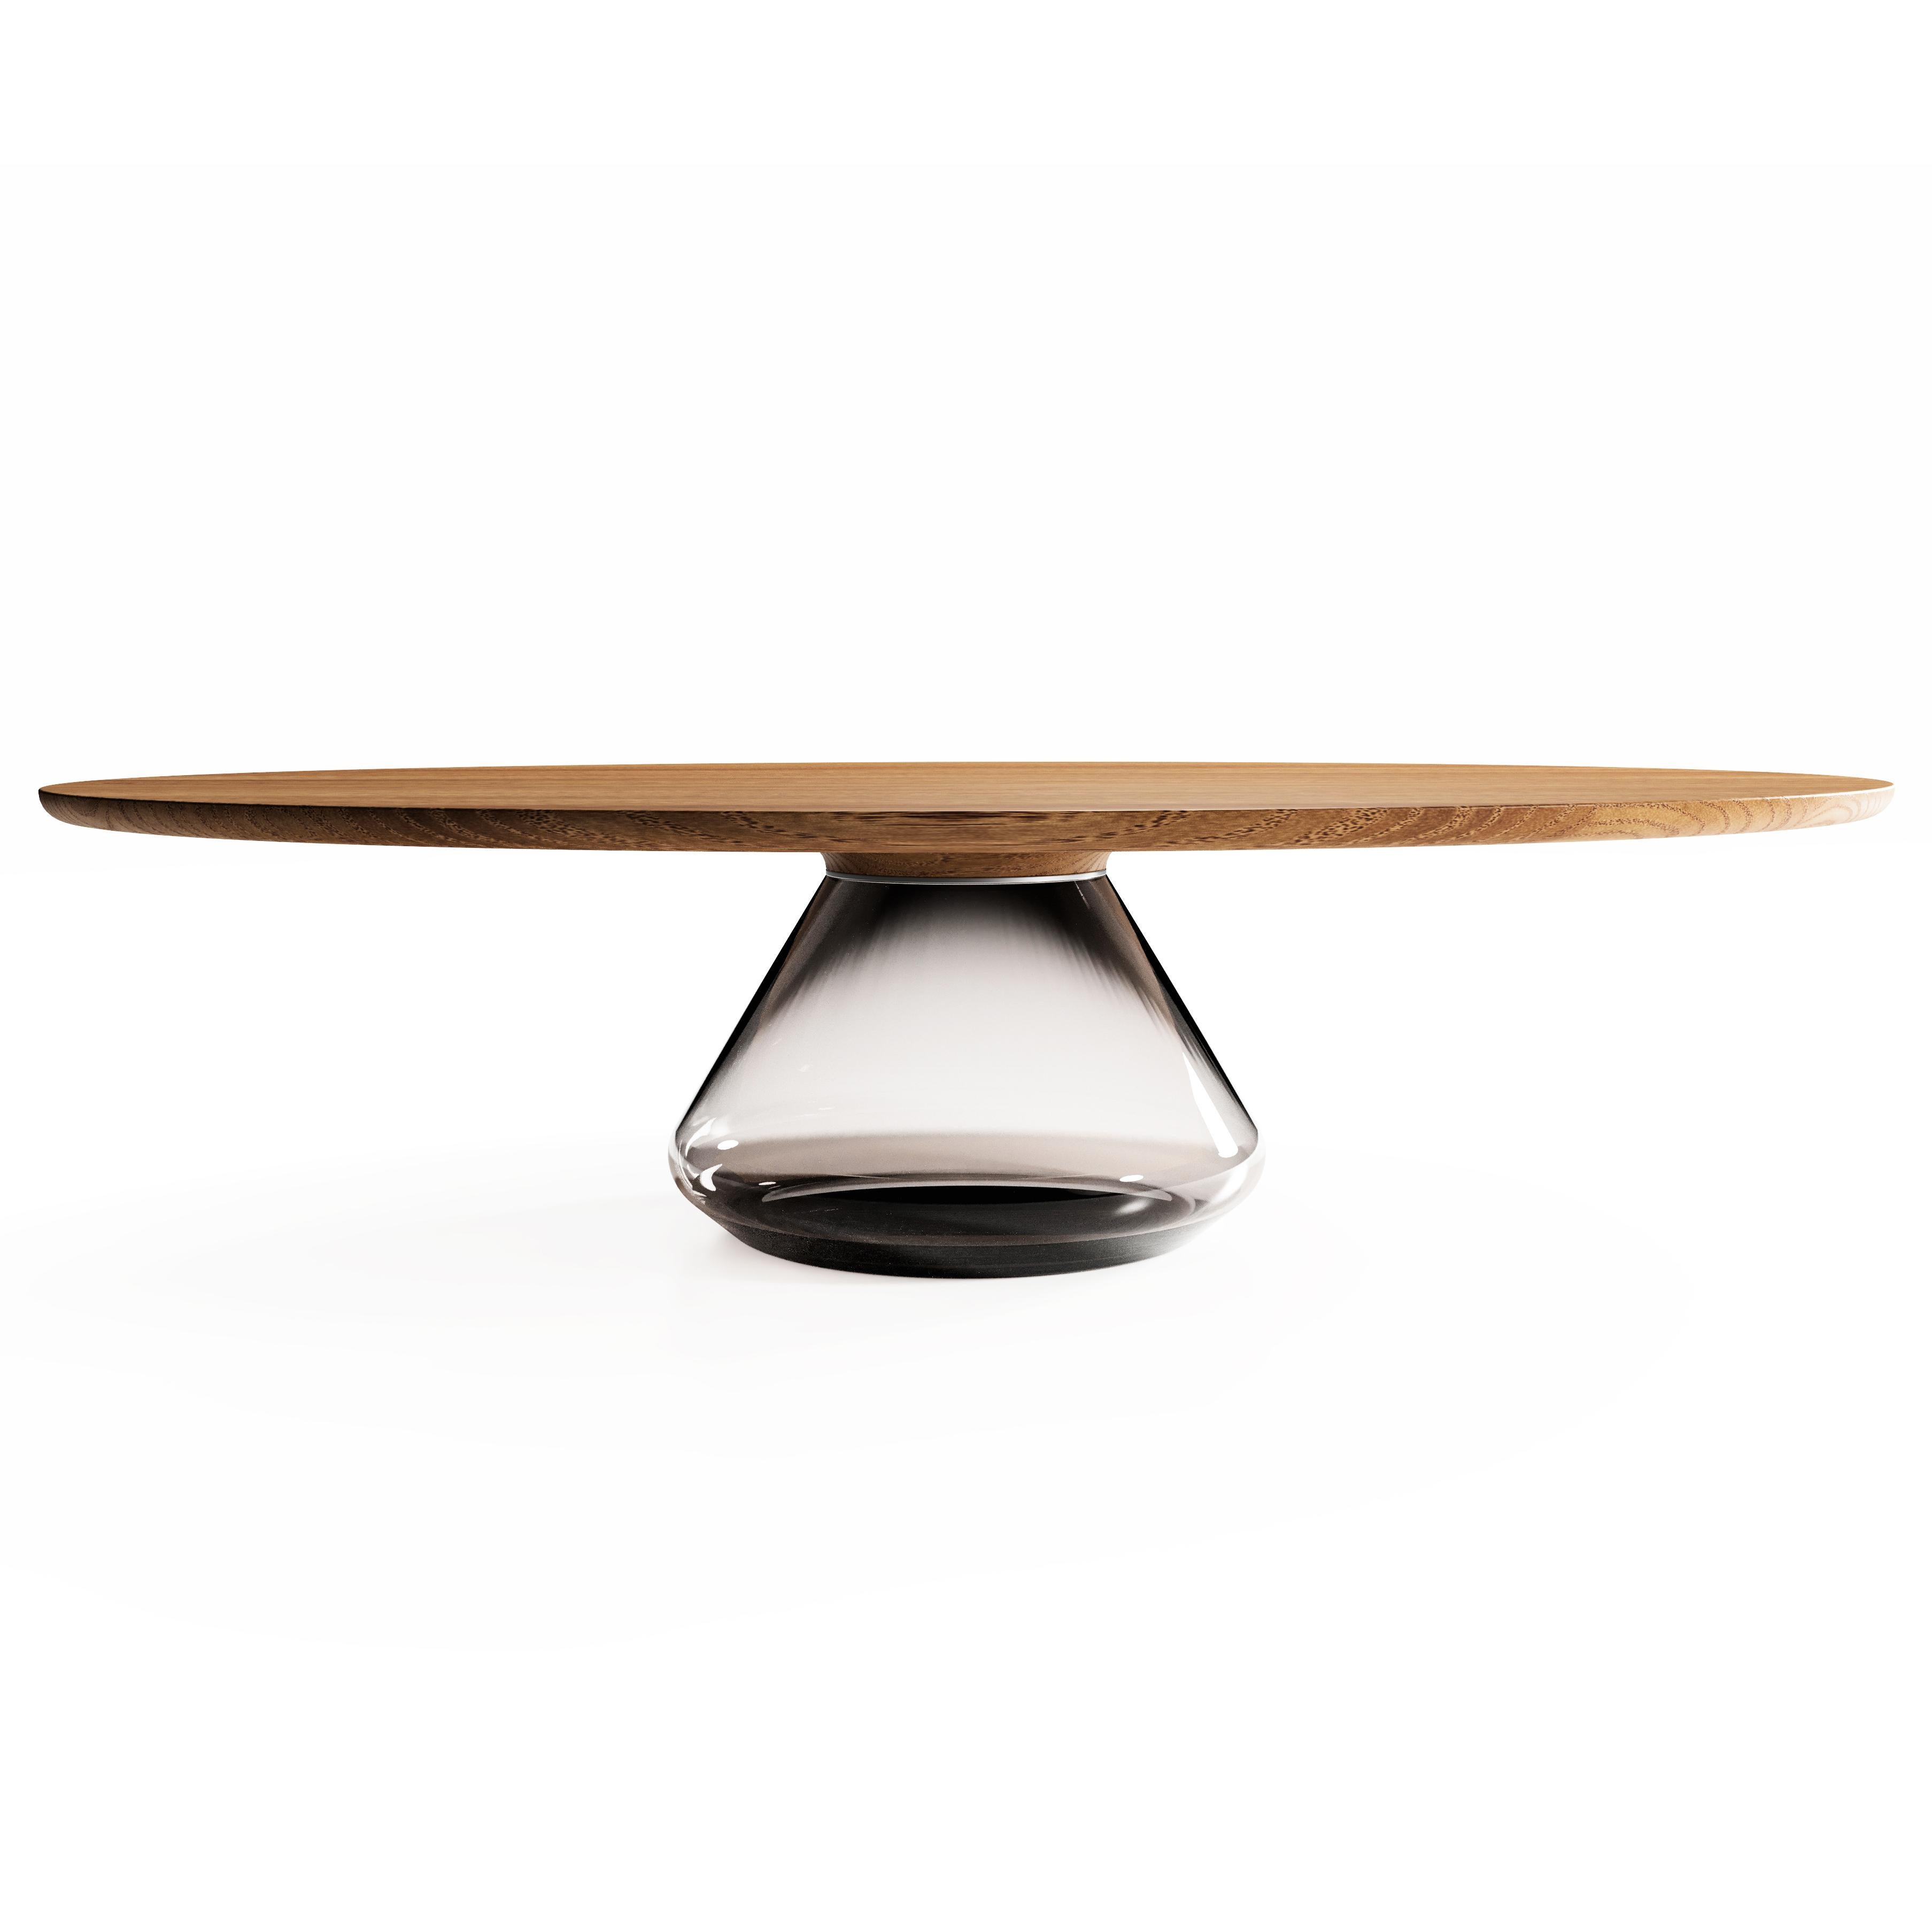 The Smoky Eclipse I, limited edition coffee table by Grzegorz Majka
Limited Edition of 8
Dimensions: 54 x 48 x 14 in
Materials: Glass, oak

The total eclipse of every interior? With this amazing table everything is possible as with its Minimalist